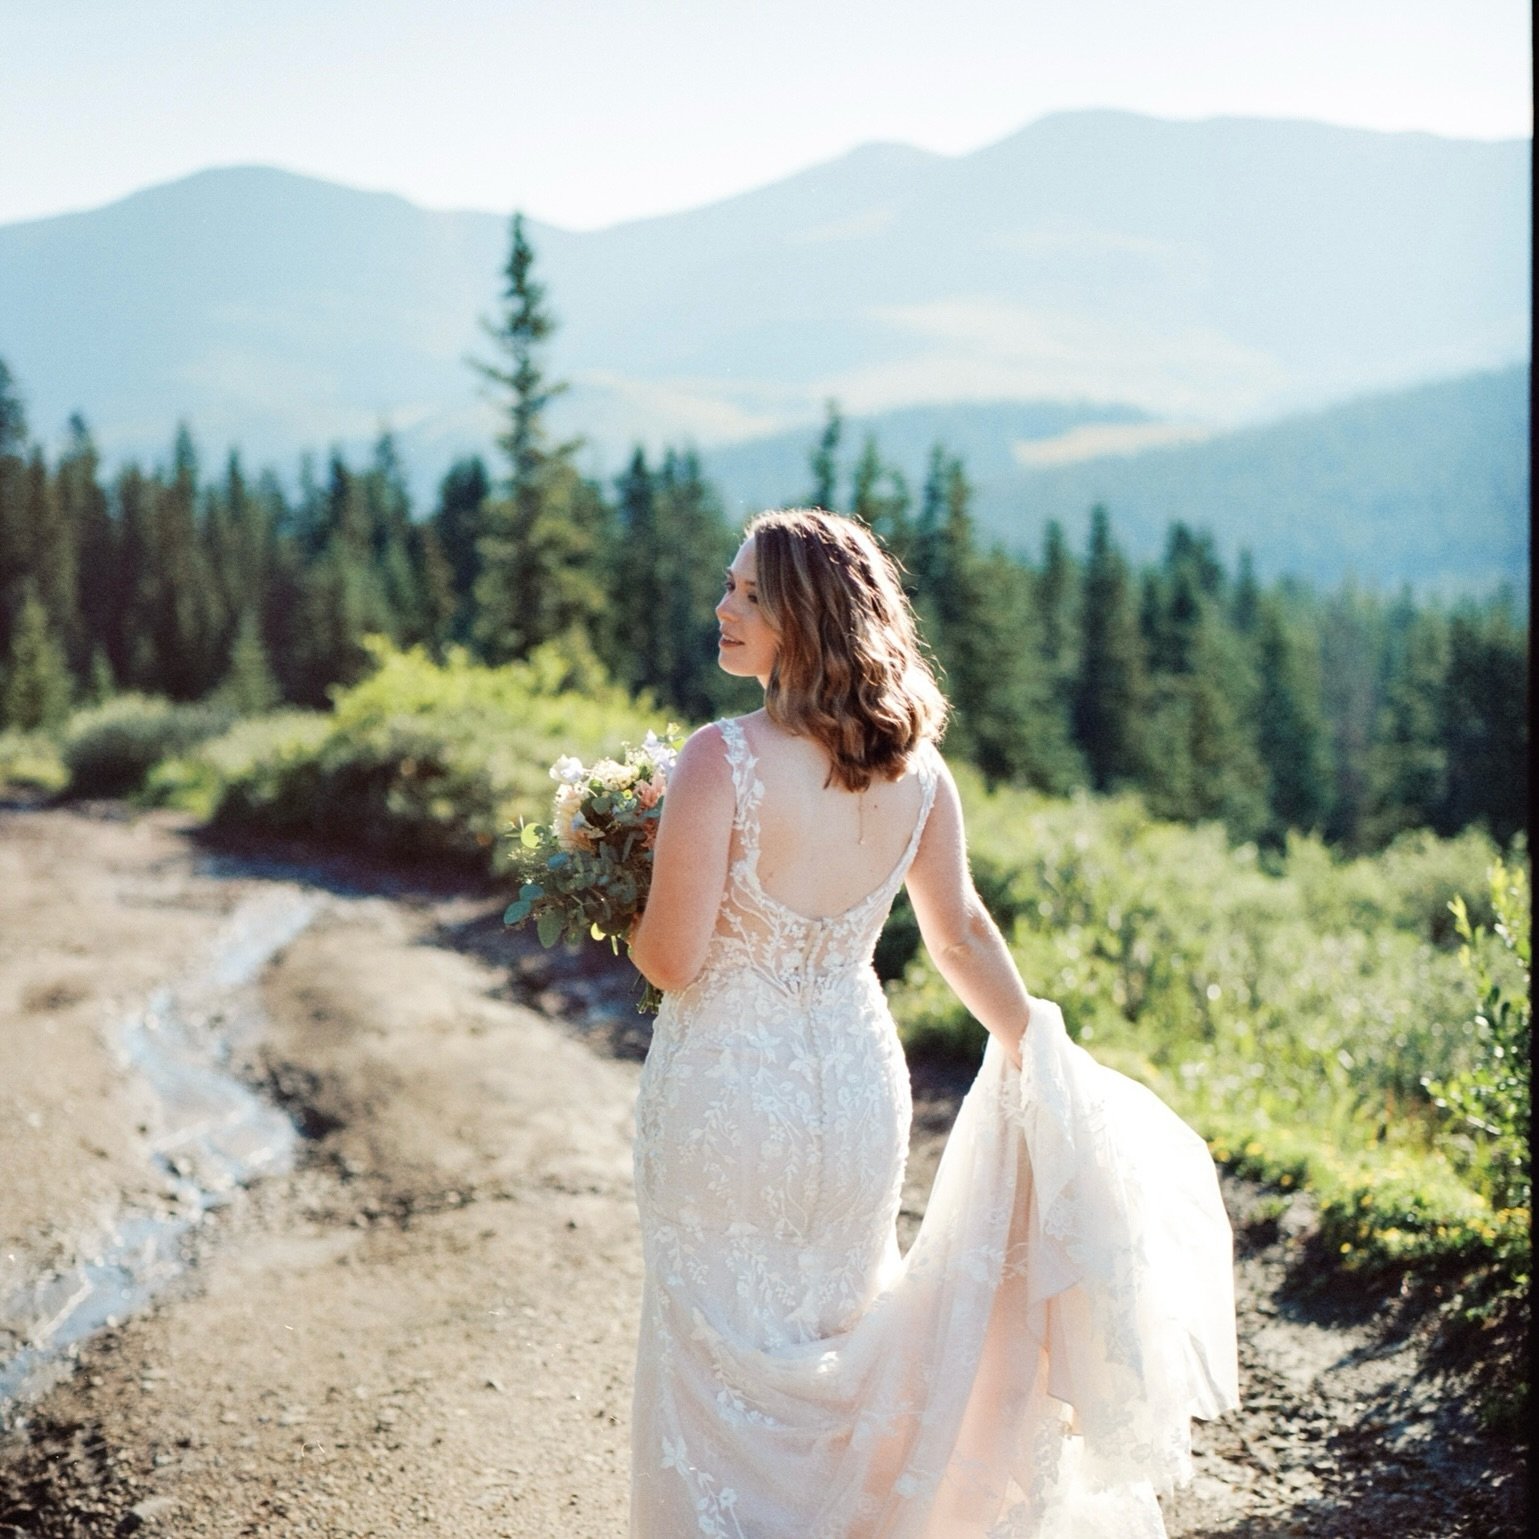 Miss Madelyn on her wedding day. 120 film. 

#Coloradoelopementphotographer #coloradoelopement #elopementphotographer #microweddingphotographer #pnwelopement #pnwelopementphotographer #utahelopement #utahelopementphotographer a film mountain sunrise 